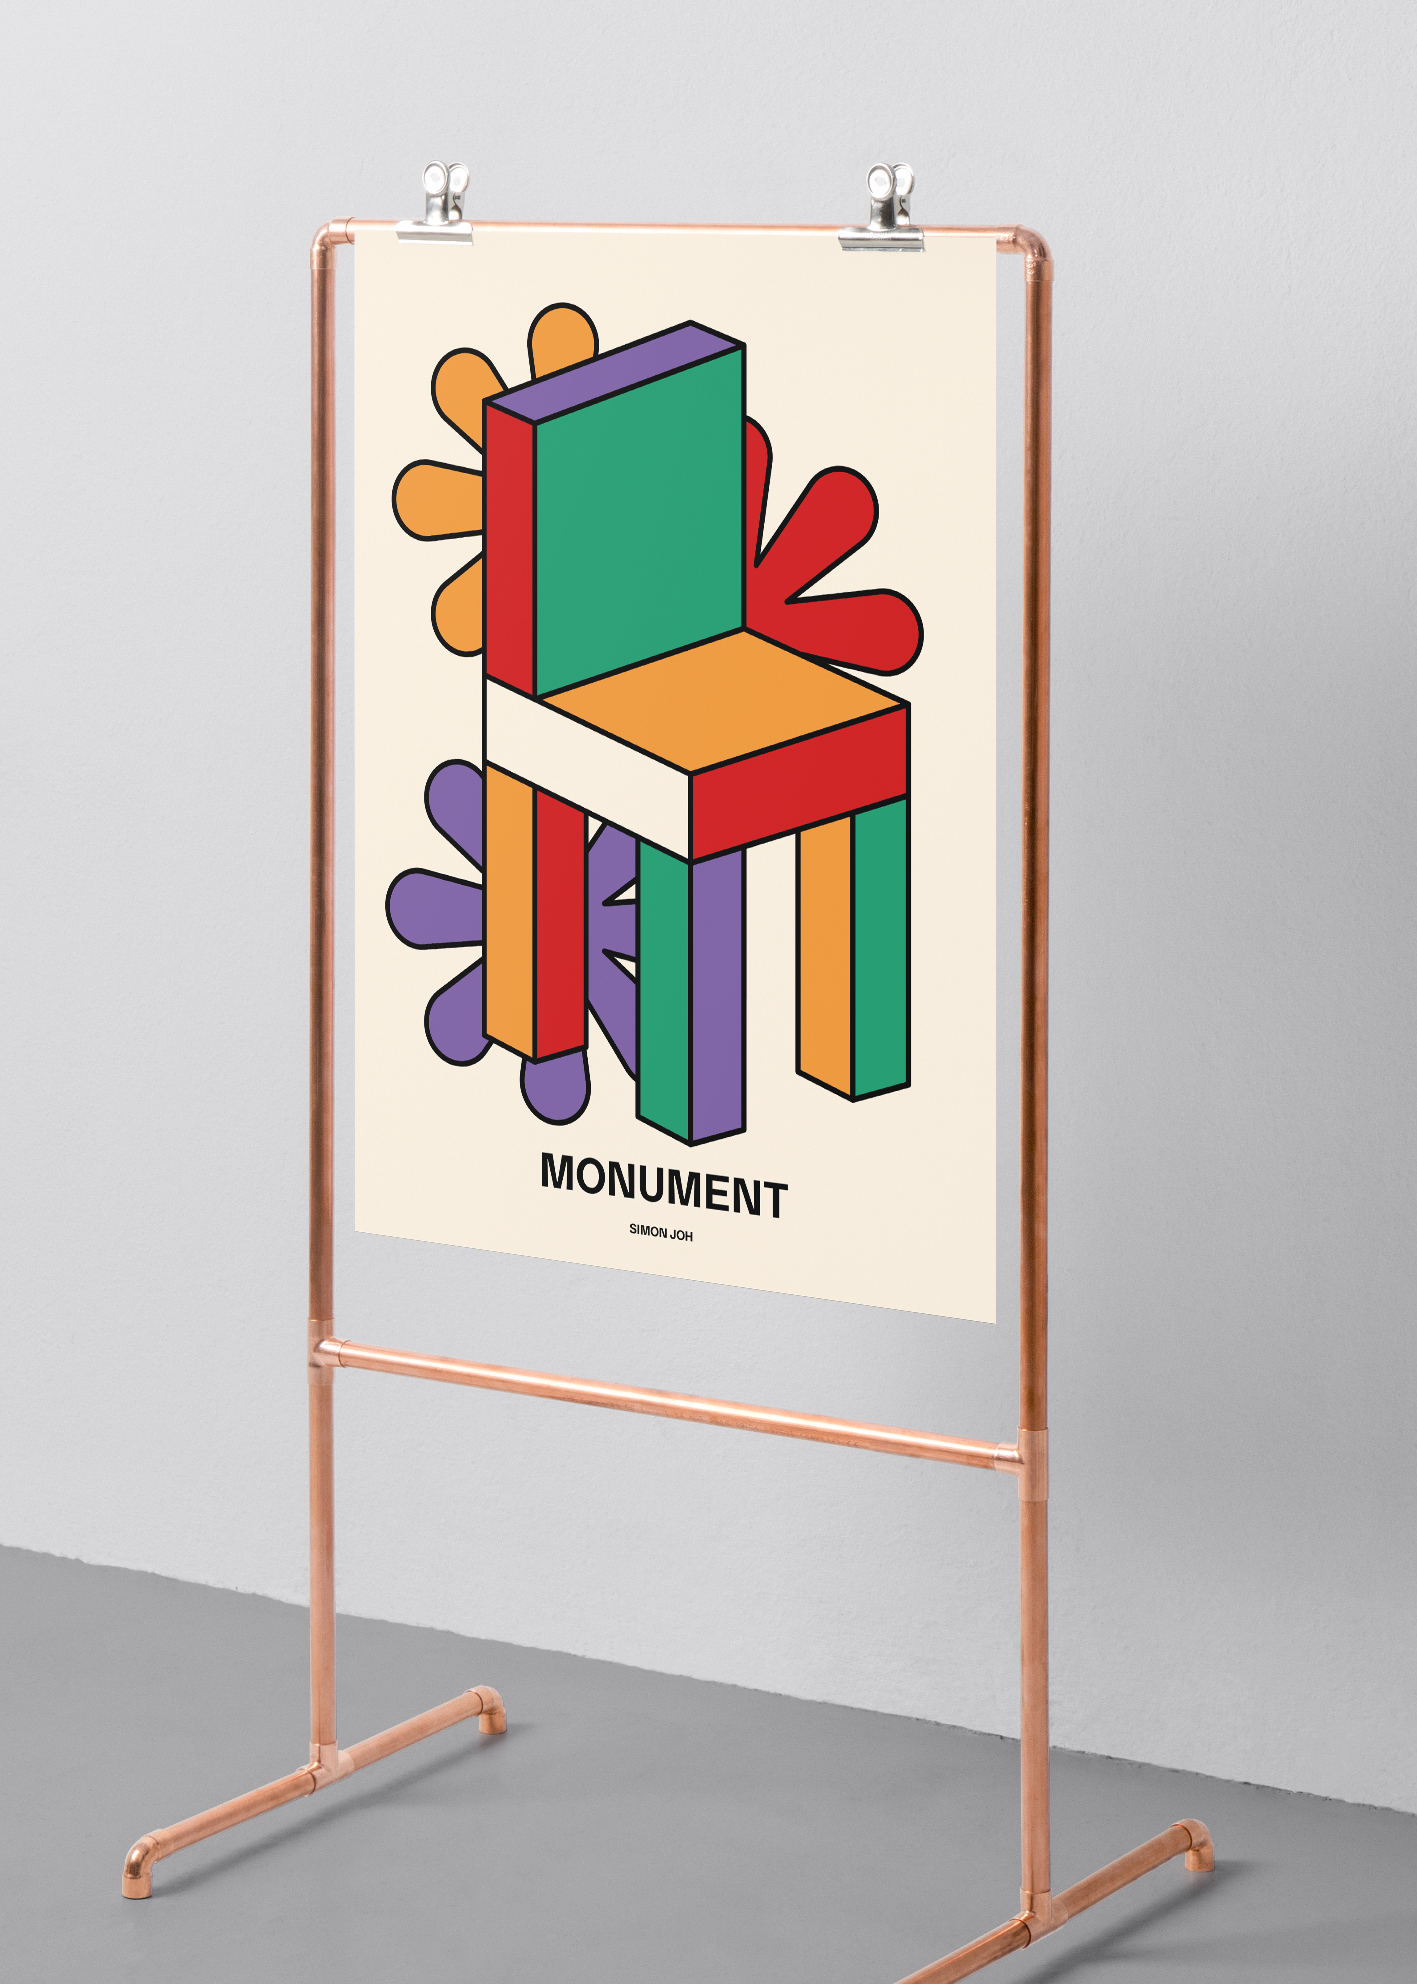 joh-poster_monument01_04